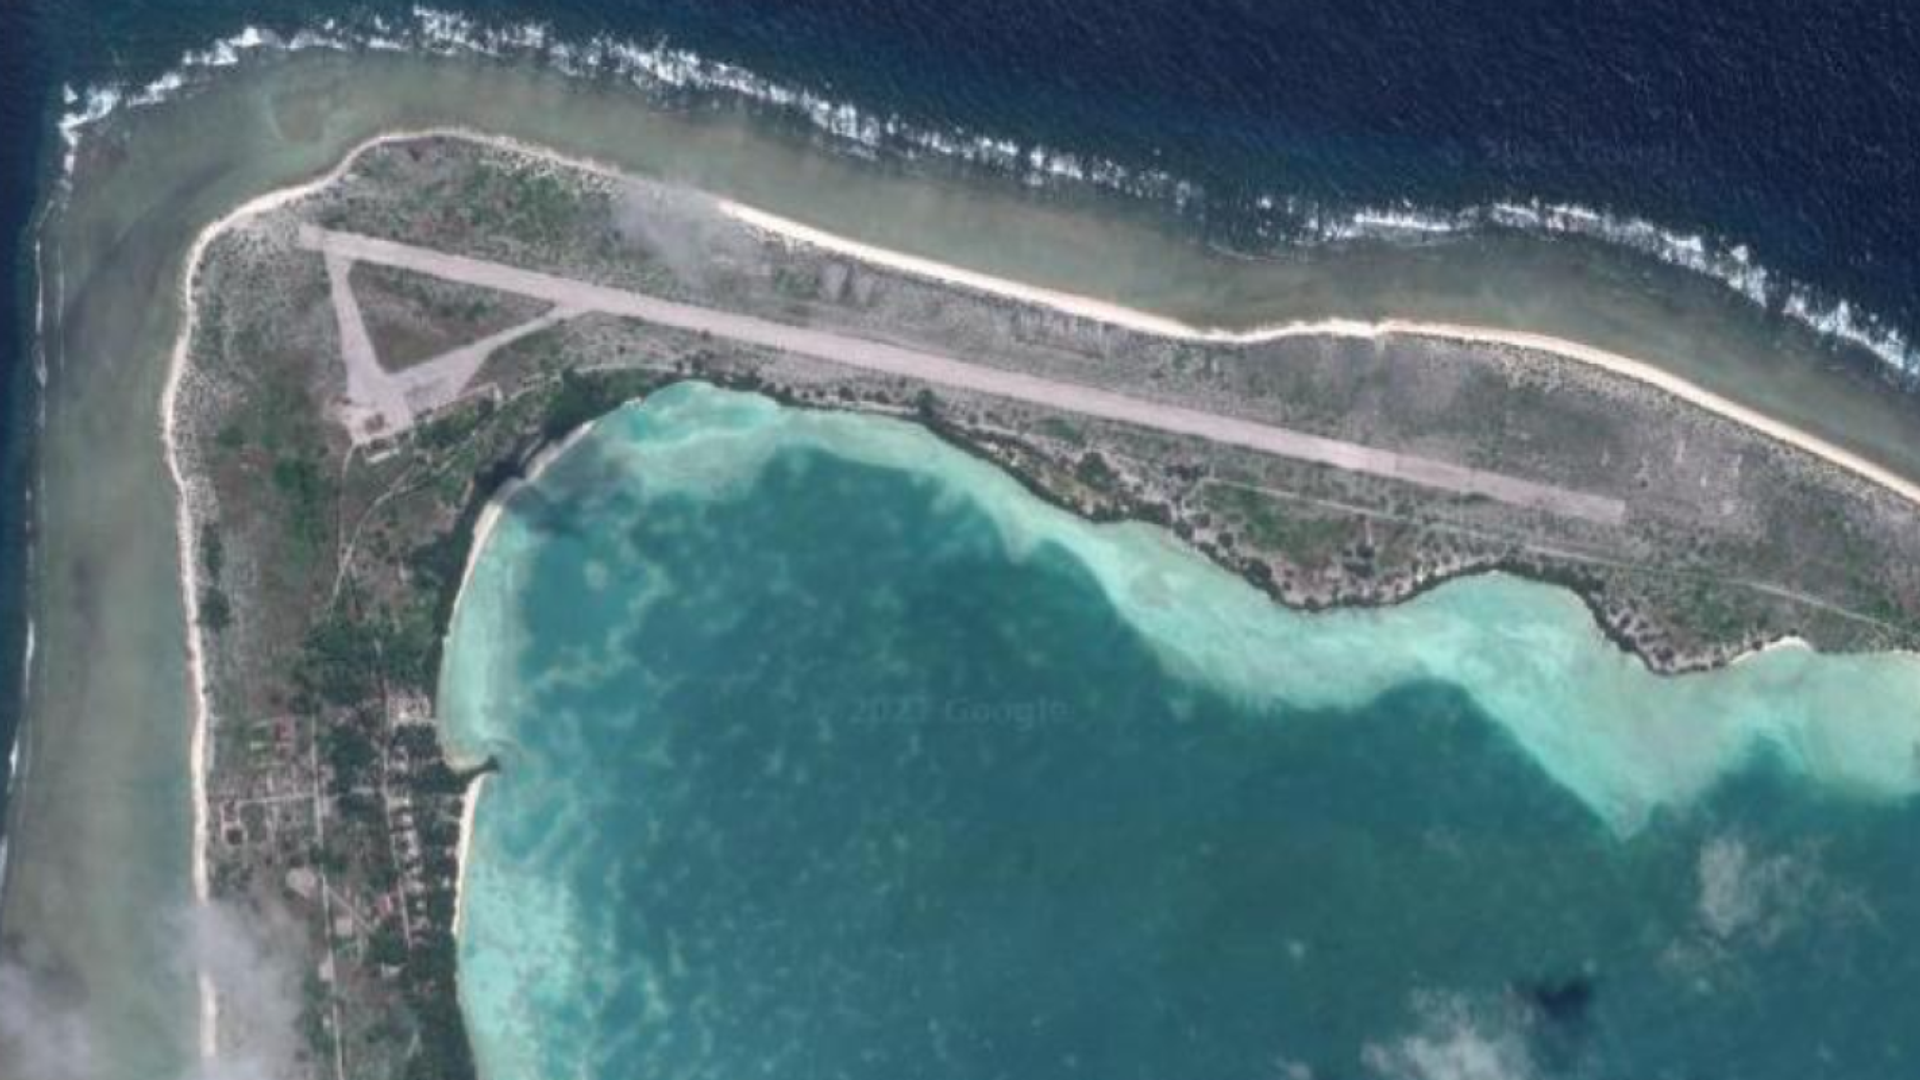 The derelict airfield on Kanton Island, Kiribati. While measuring 8,000 feet in length, the easternmost 1,500 feet of the airstrip are overgrown with shrubs and trees, leaving just 6,500 feet for possible use. - Sputnik International, 1920, 06.05.2021